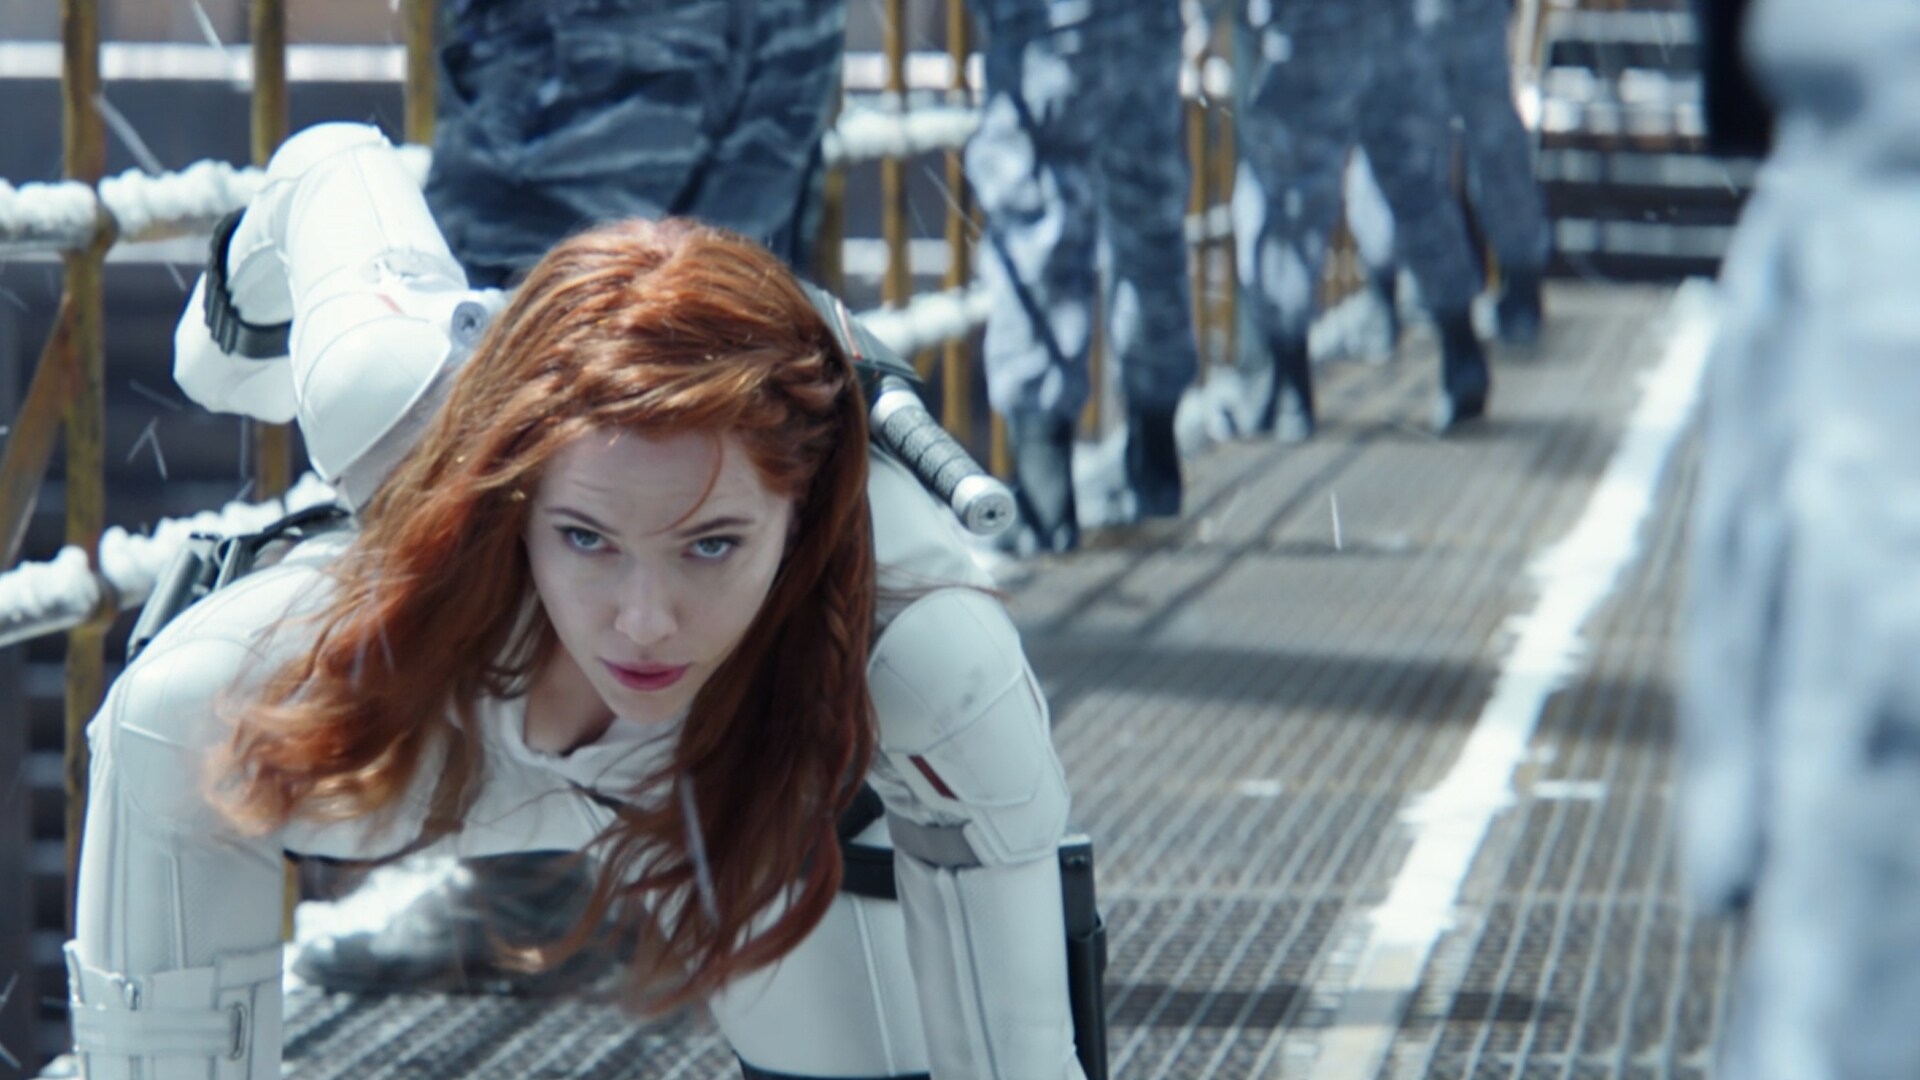 Marvel Studios Celebrates The Movies. A still image from Black Widow